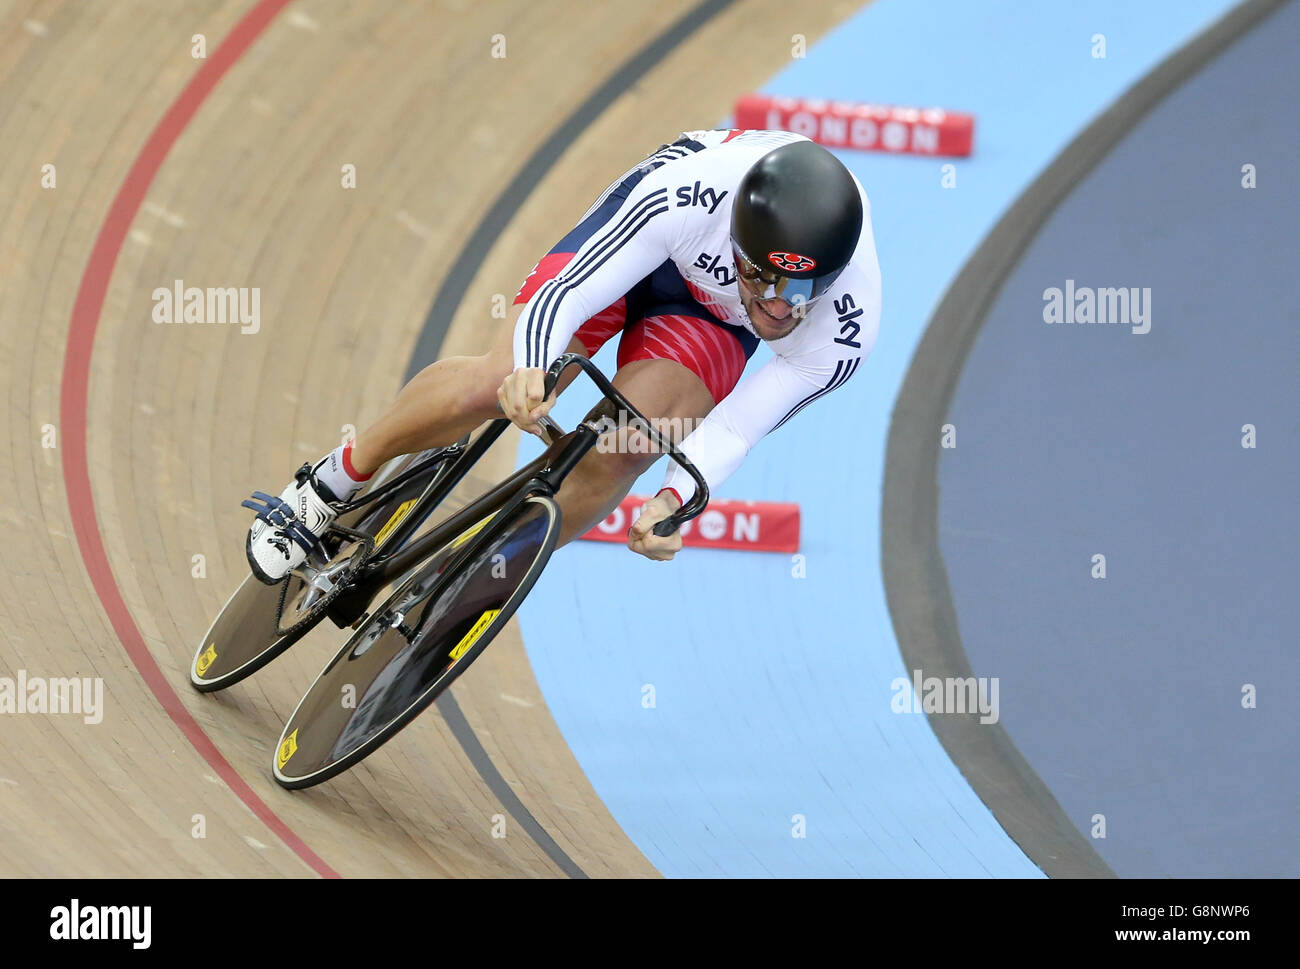 Great Britain's Callum Skinner during the Men's Sprint qualifying during day three of the UCI Track Cycling World Championships at Lee Valley VeloPark, London. Stock Photo